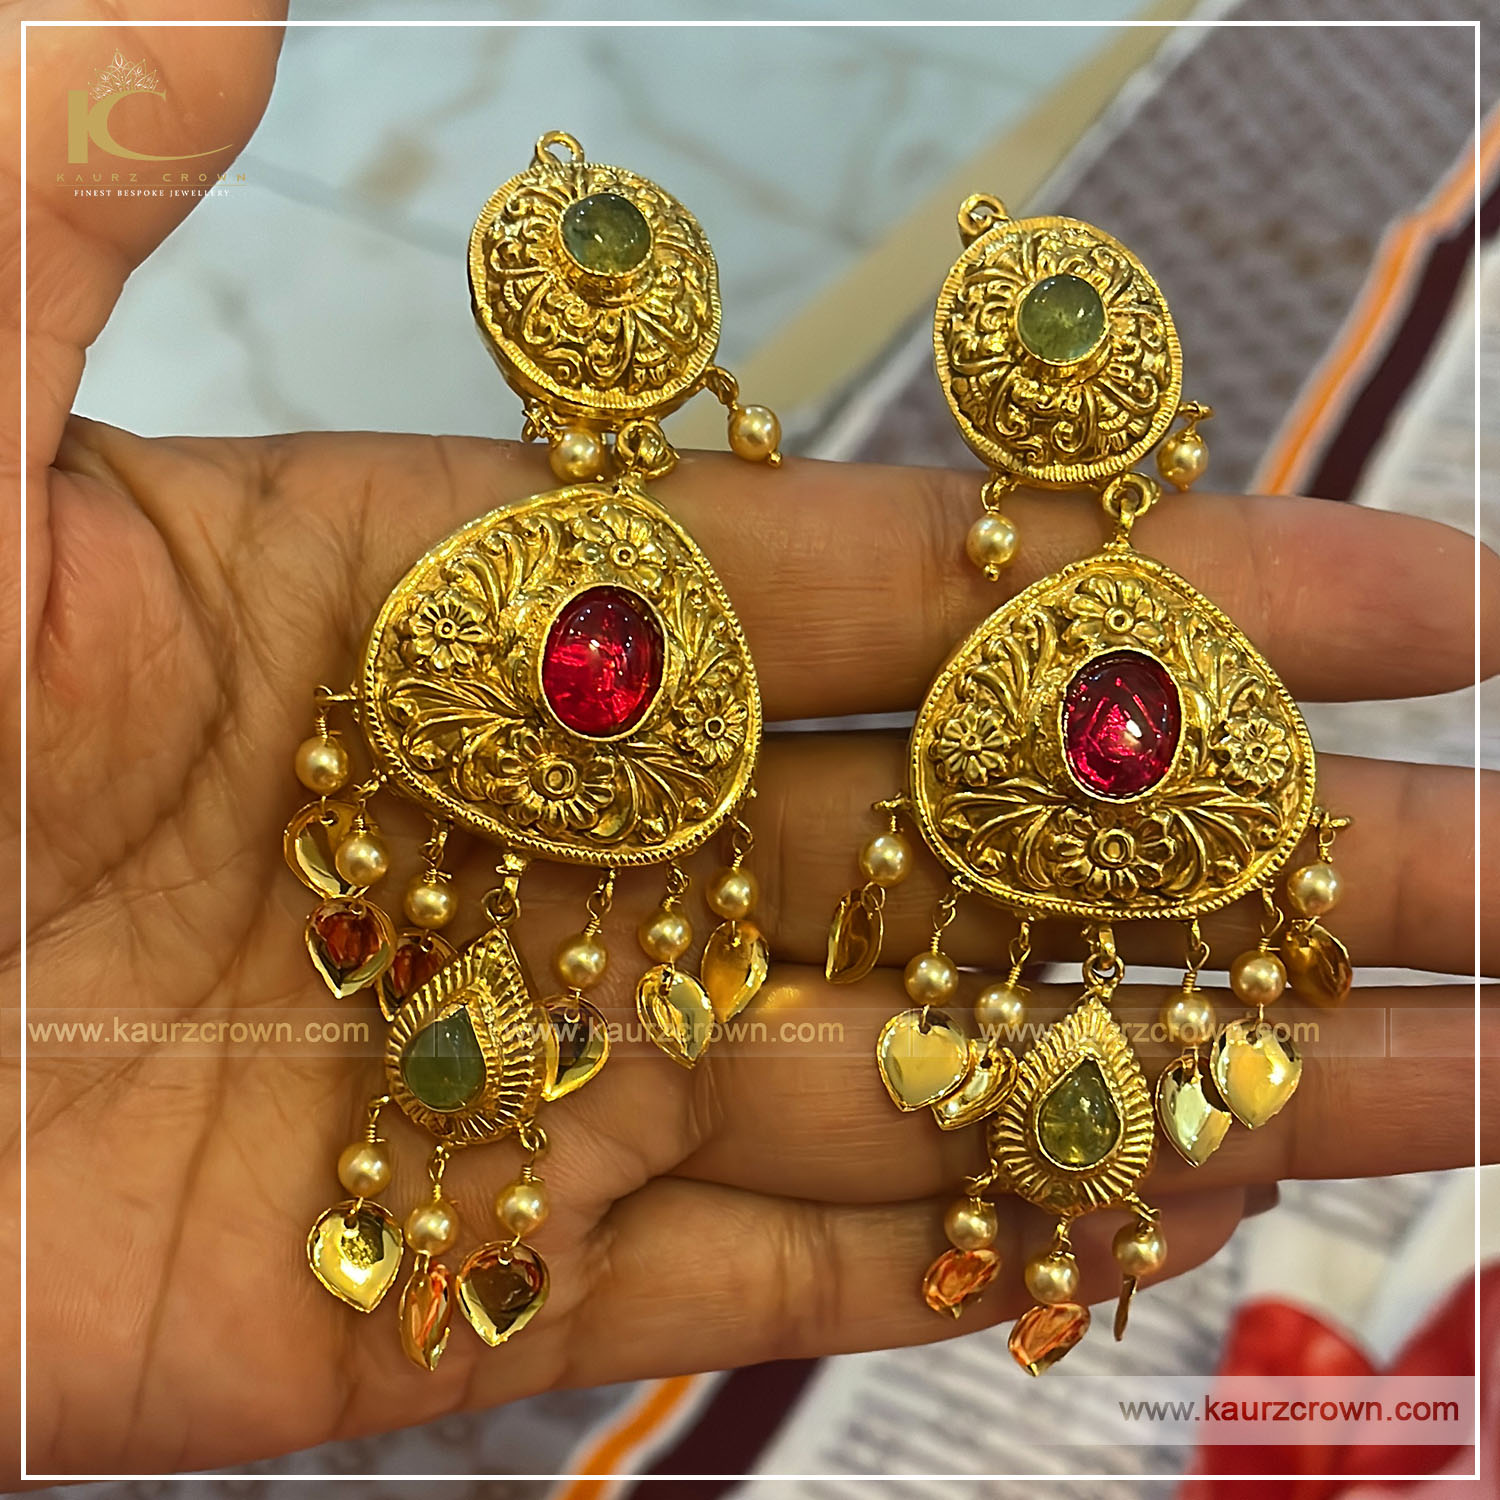 Intricate Nakshi Antique Gold Earrings